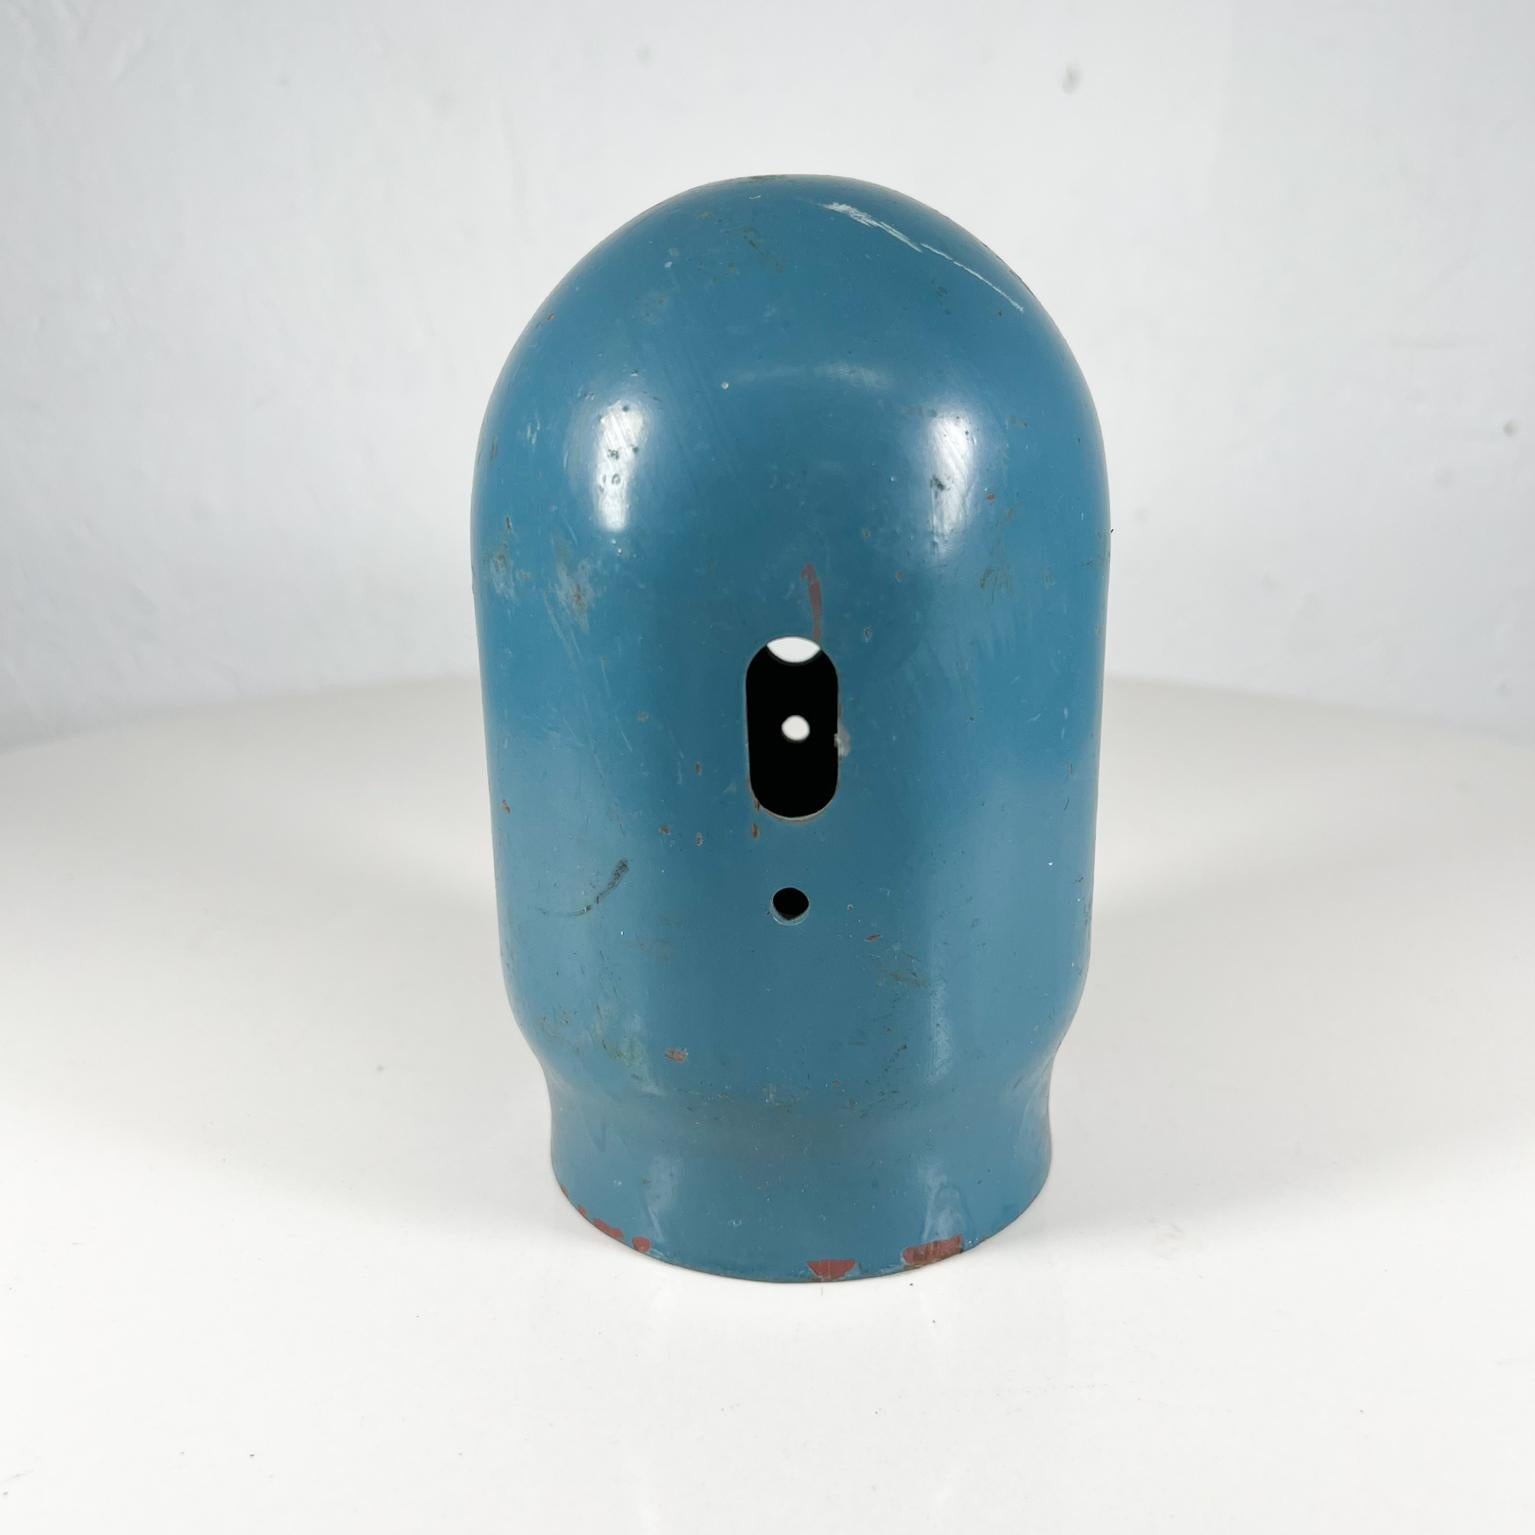 Blue metal vintage gas cylinder Cap
Measures : 6 tall x 3.75 diameter
Preowned original unrestored vintage condition.
See images provided.


